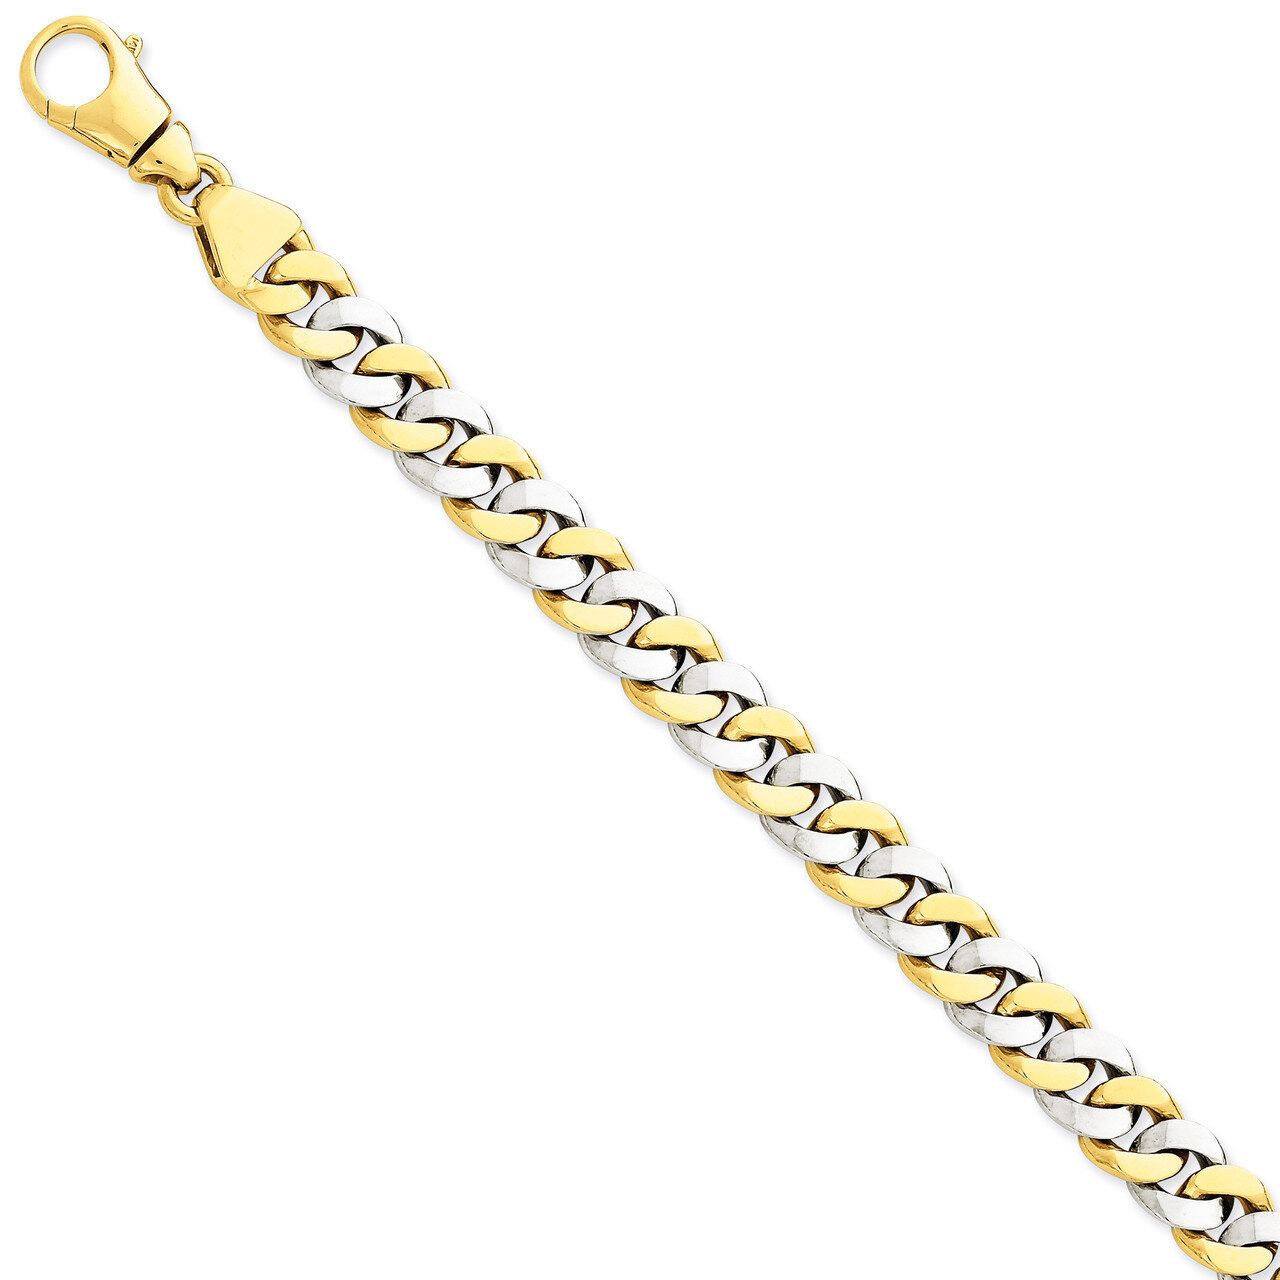 10.1mm Polished Fancy Link Chain 20 Inch 14k Two-Tone Gold LK514-20